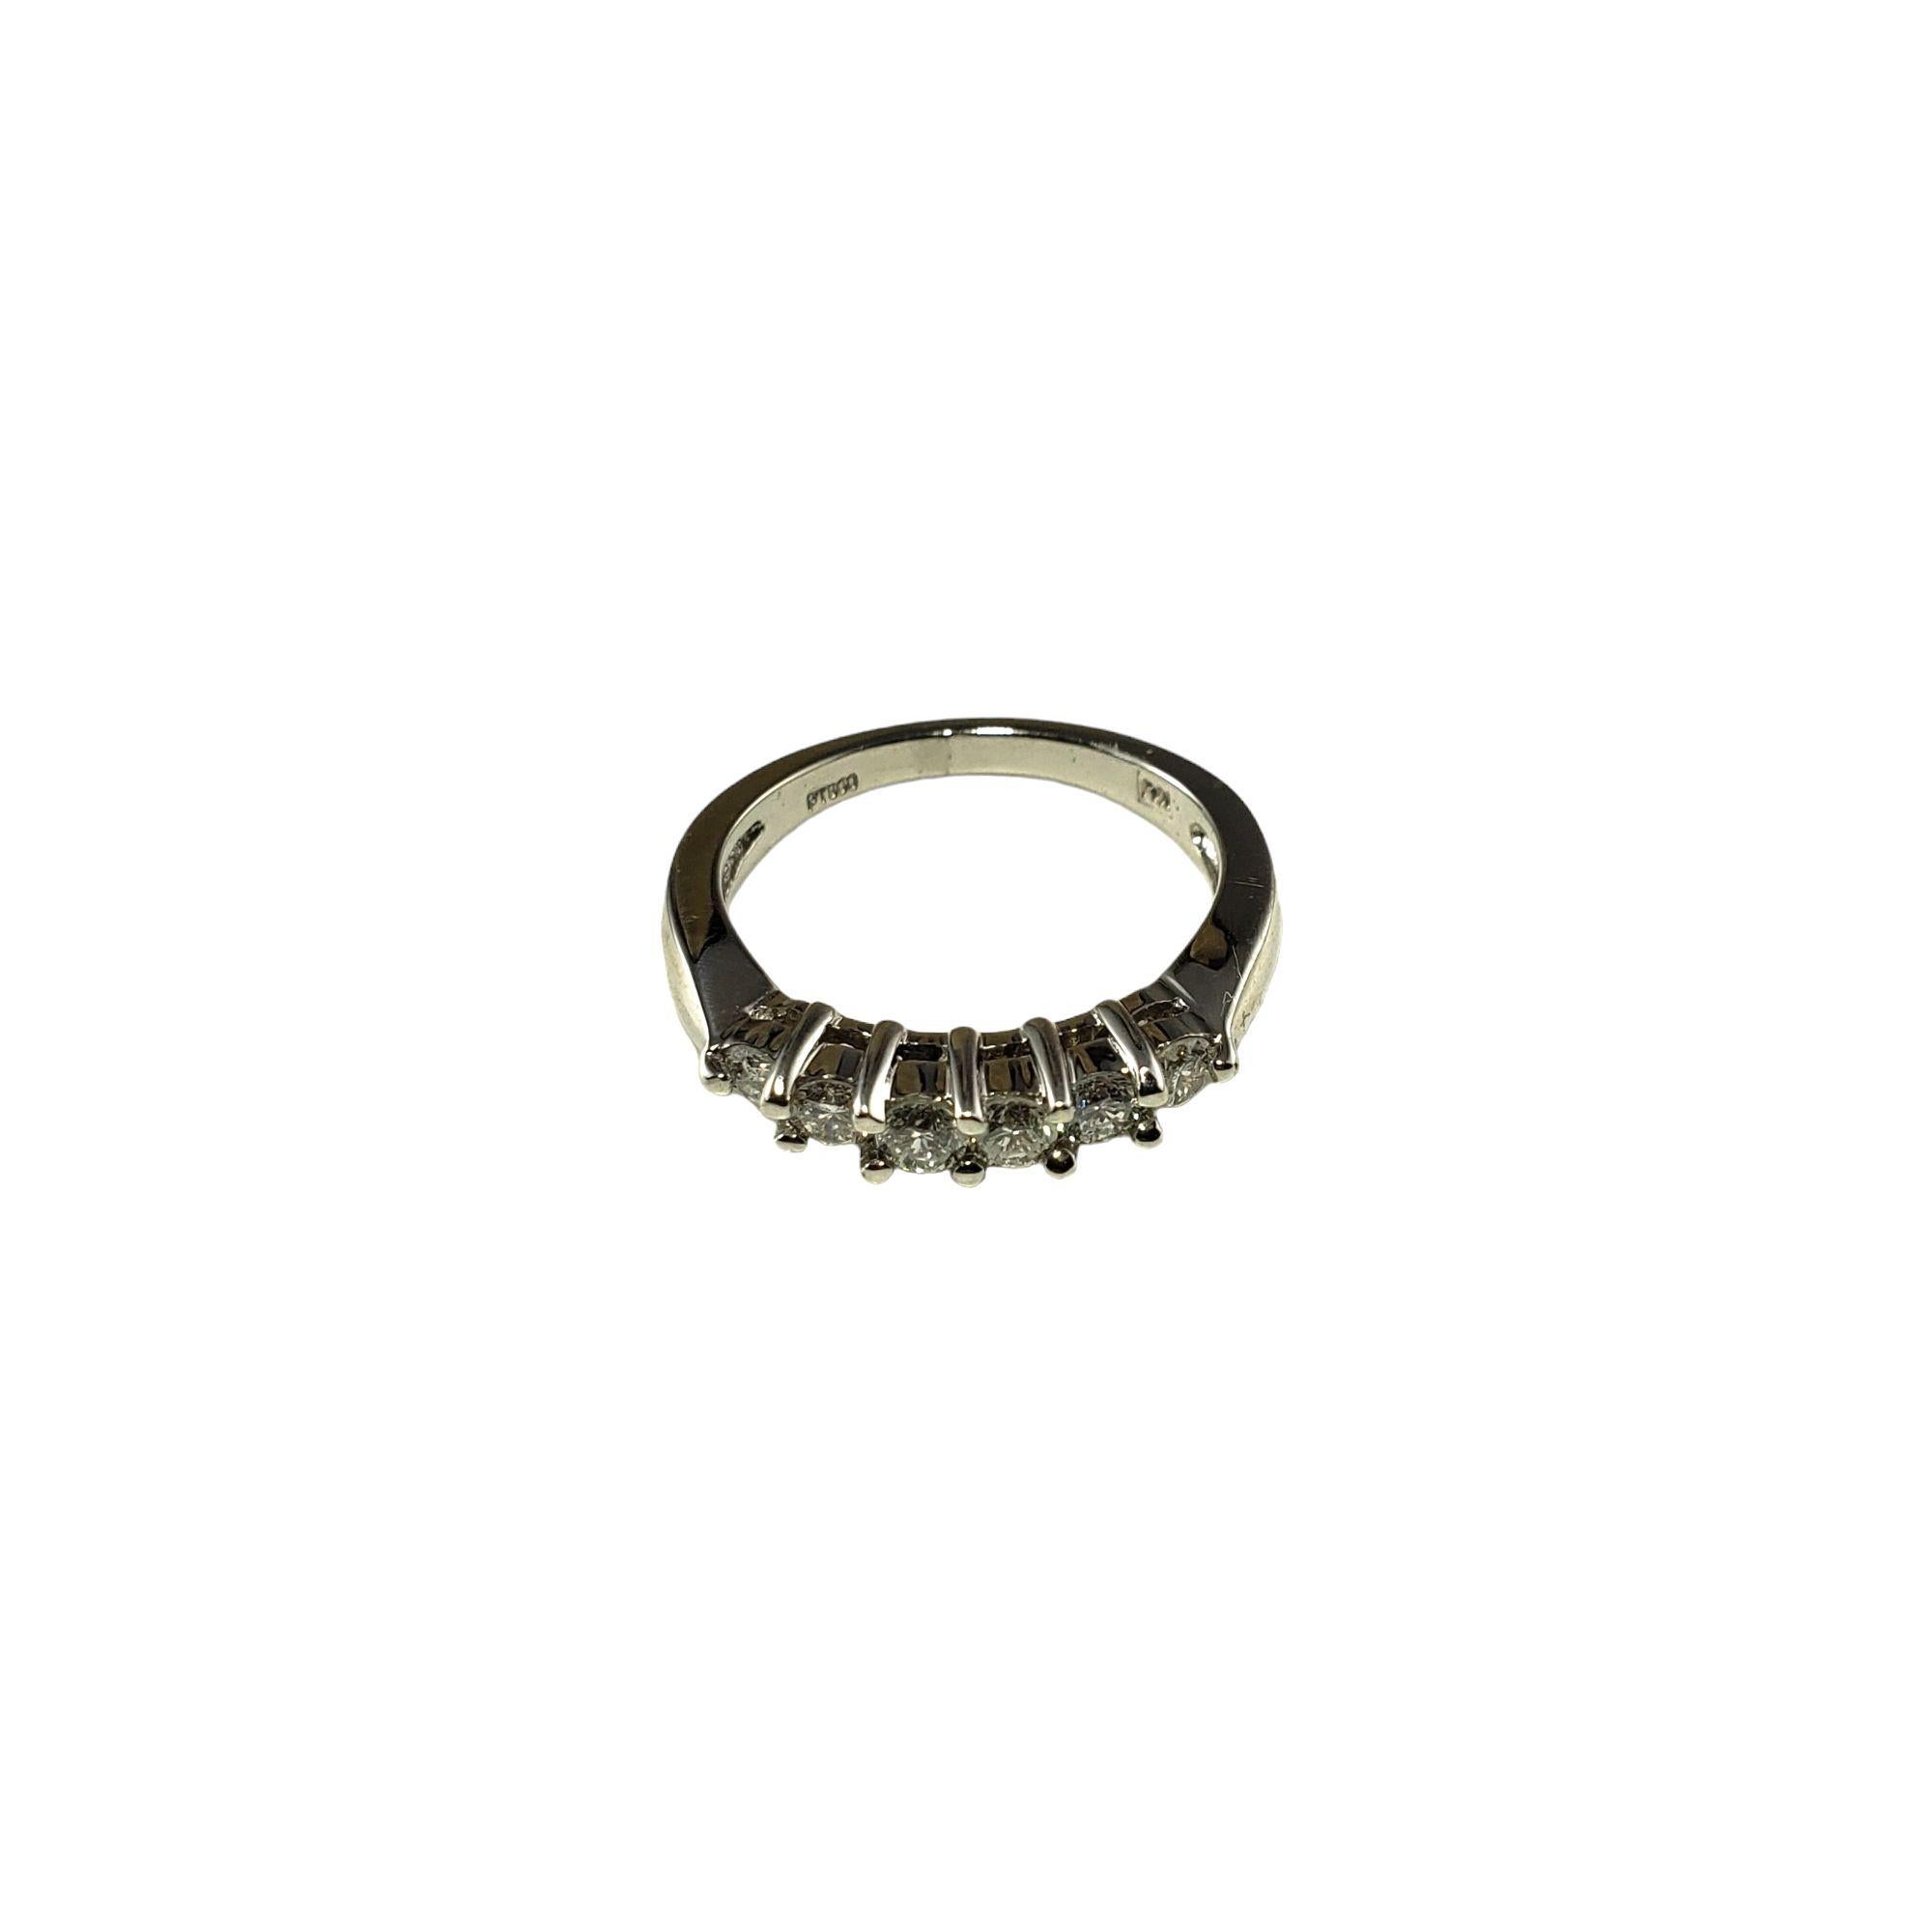 ring size 5.25 in mm